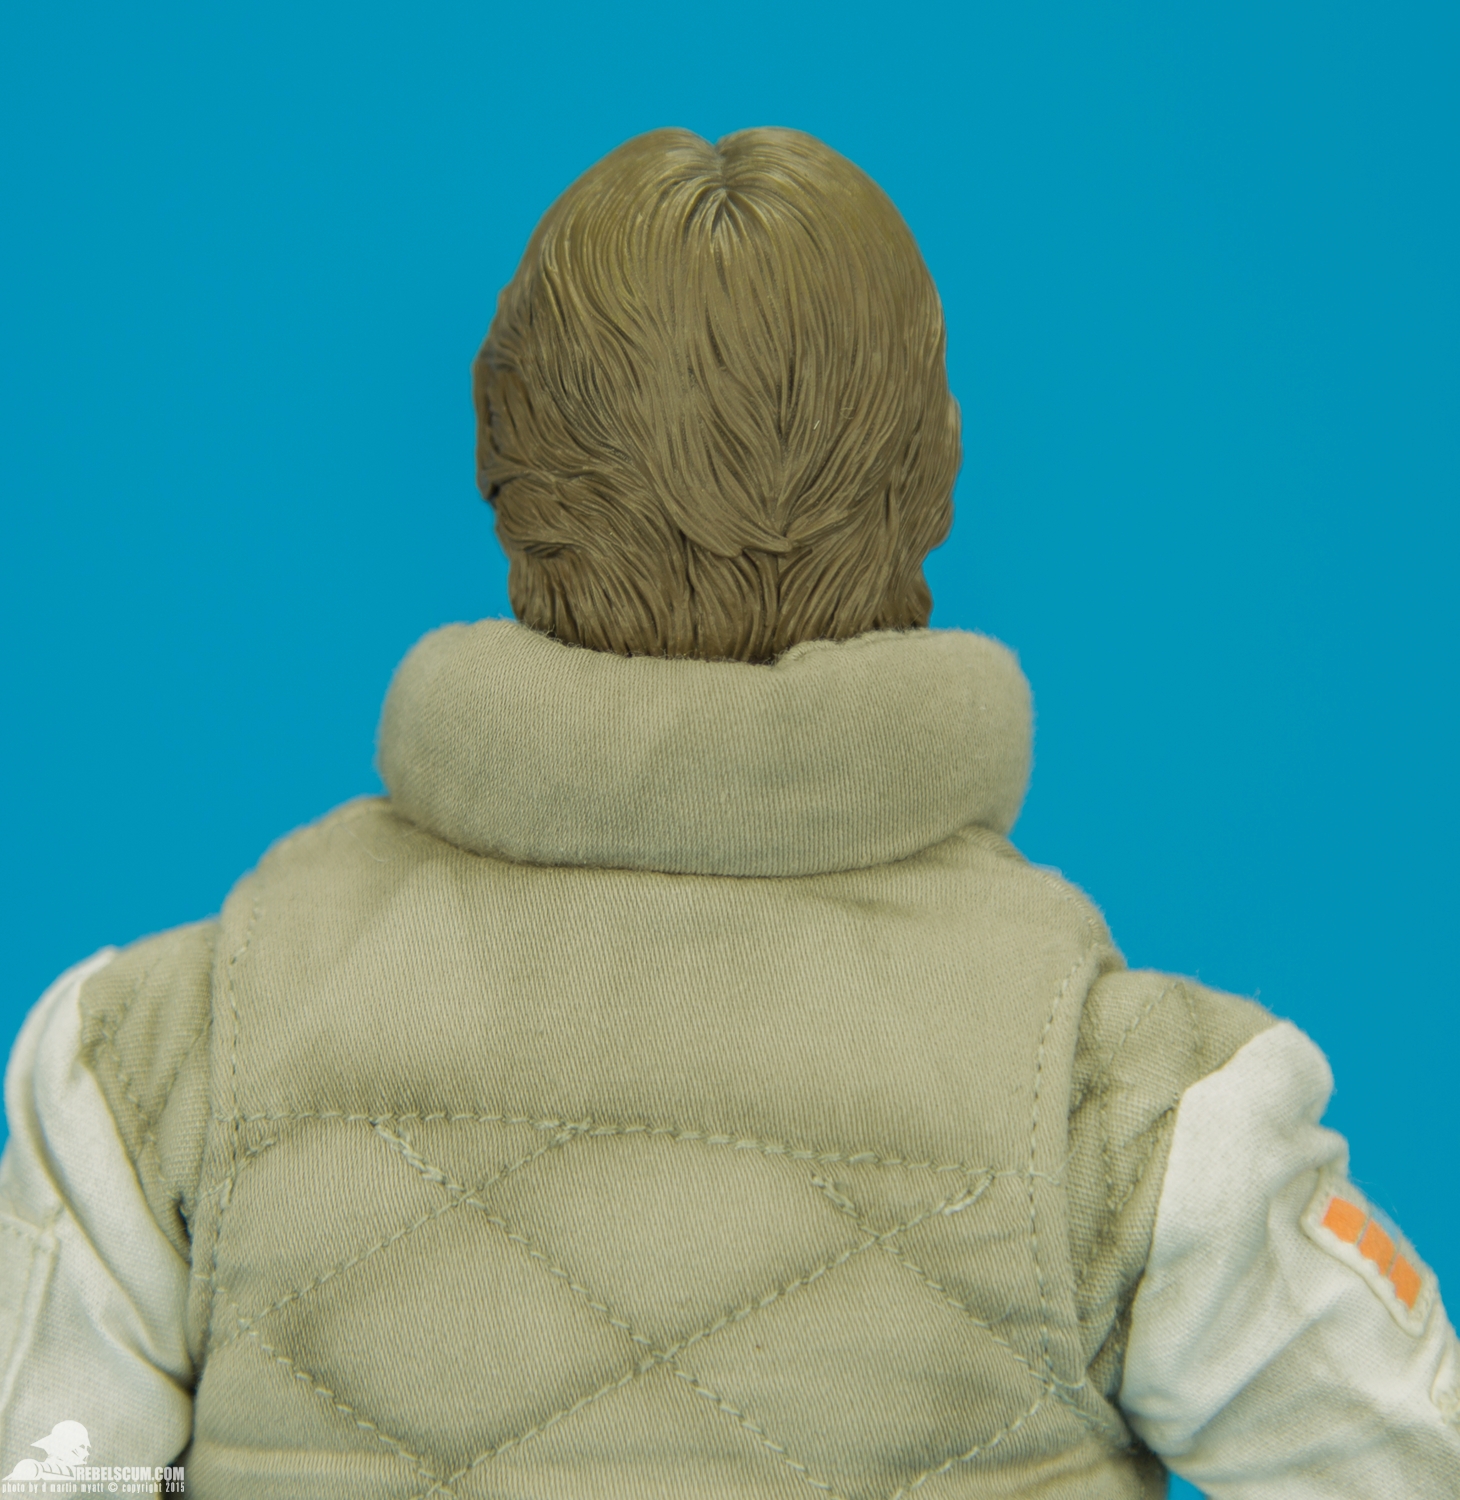 Luke-Skywalker-Hoth-Sixth-Scale-Sideshow-Collectibles-Star-Wars-016.jpg